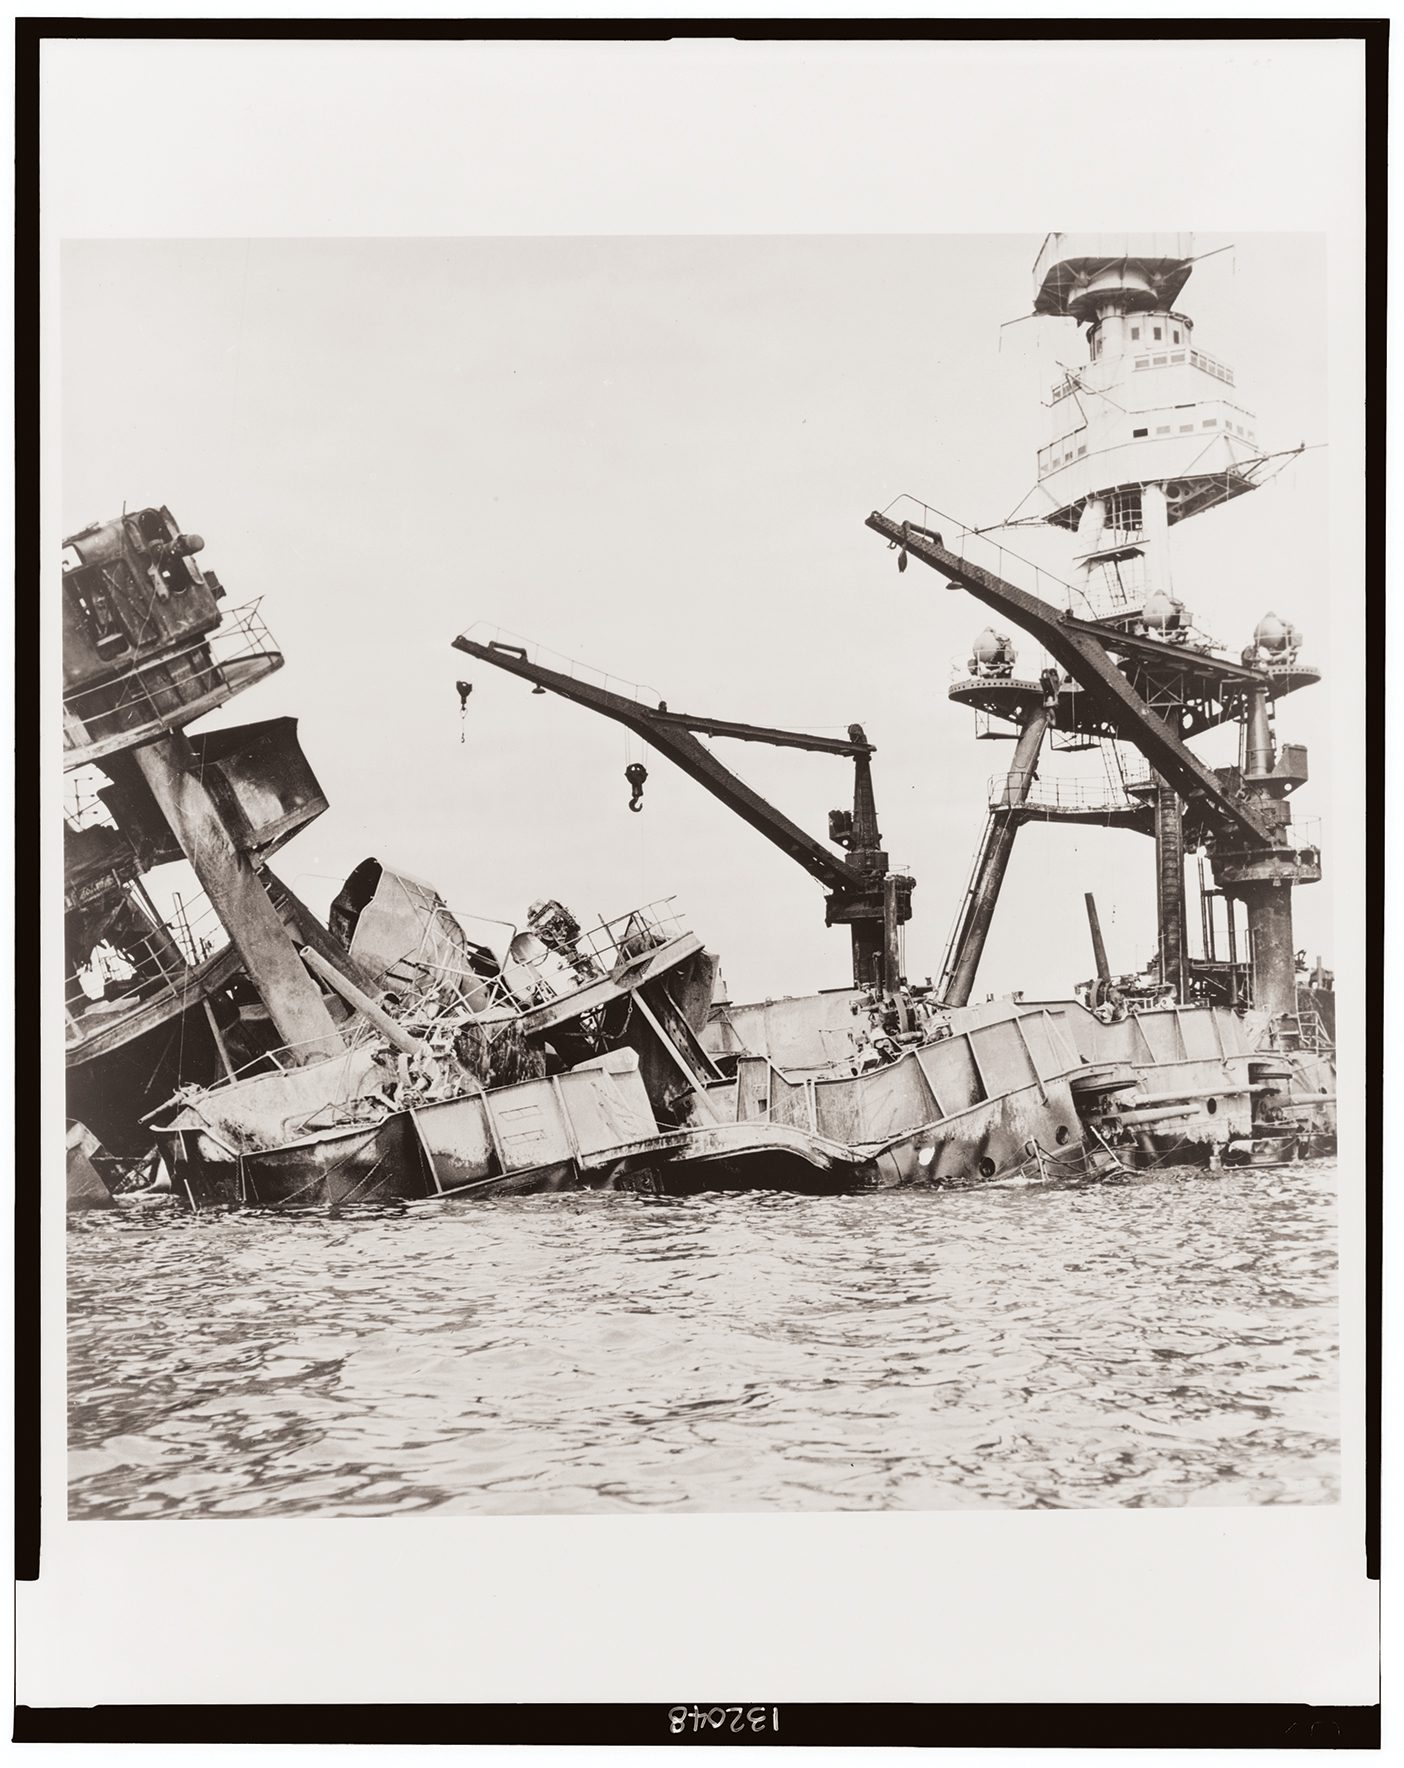 A sepia photo from 1941 shows the wreckage of the USS Arizona ship after the Attack on Pearl Harbor.